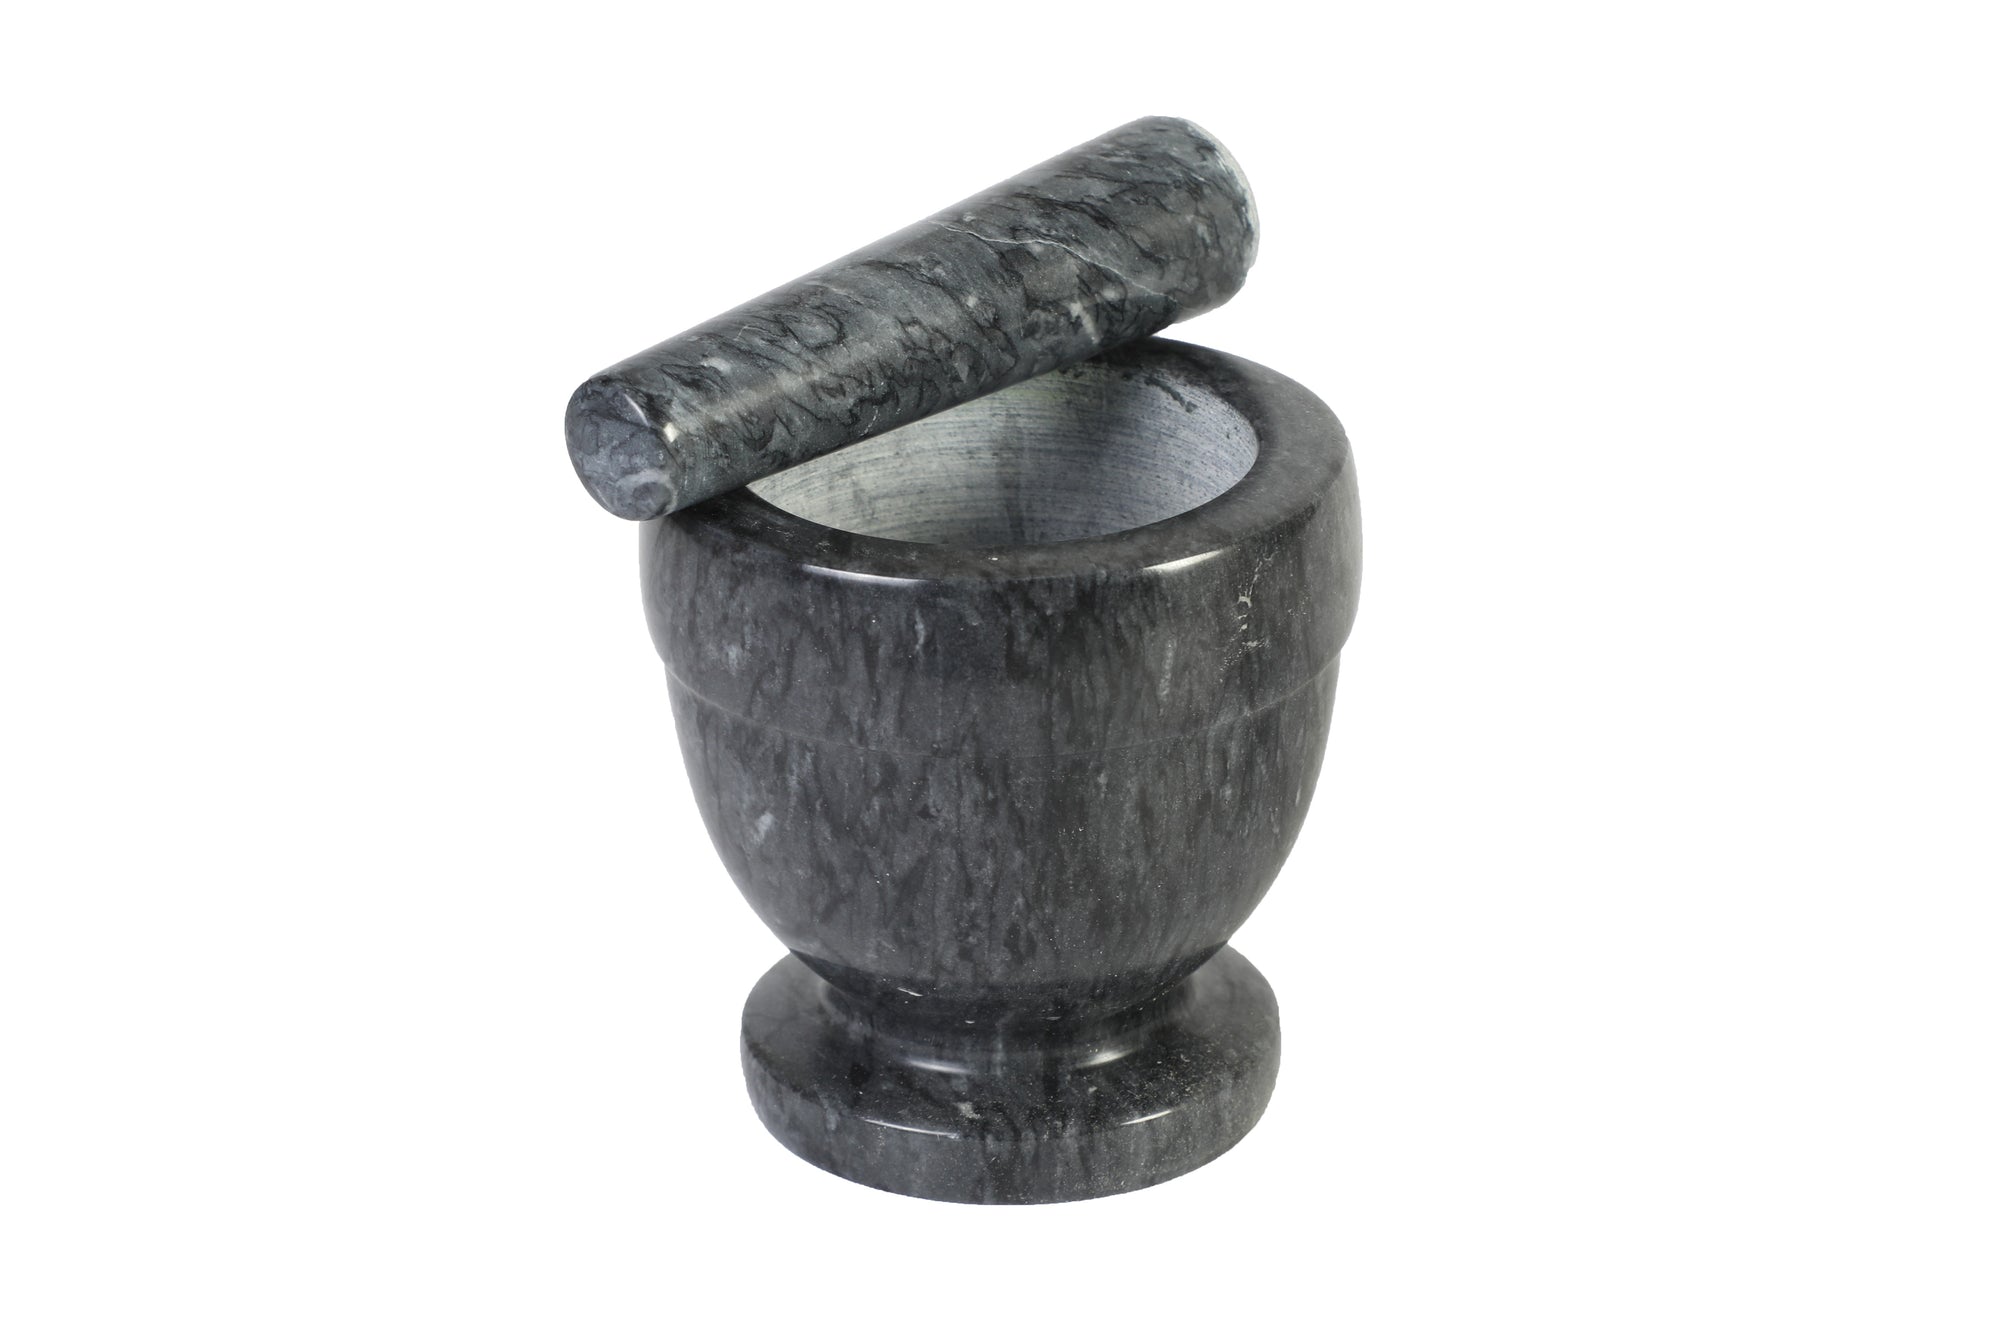 Heavy Duty Mortar and Pestle Set 1.5 Cup / Black